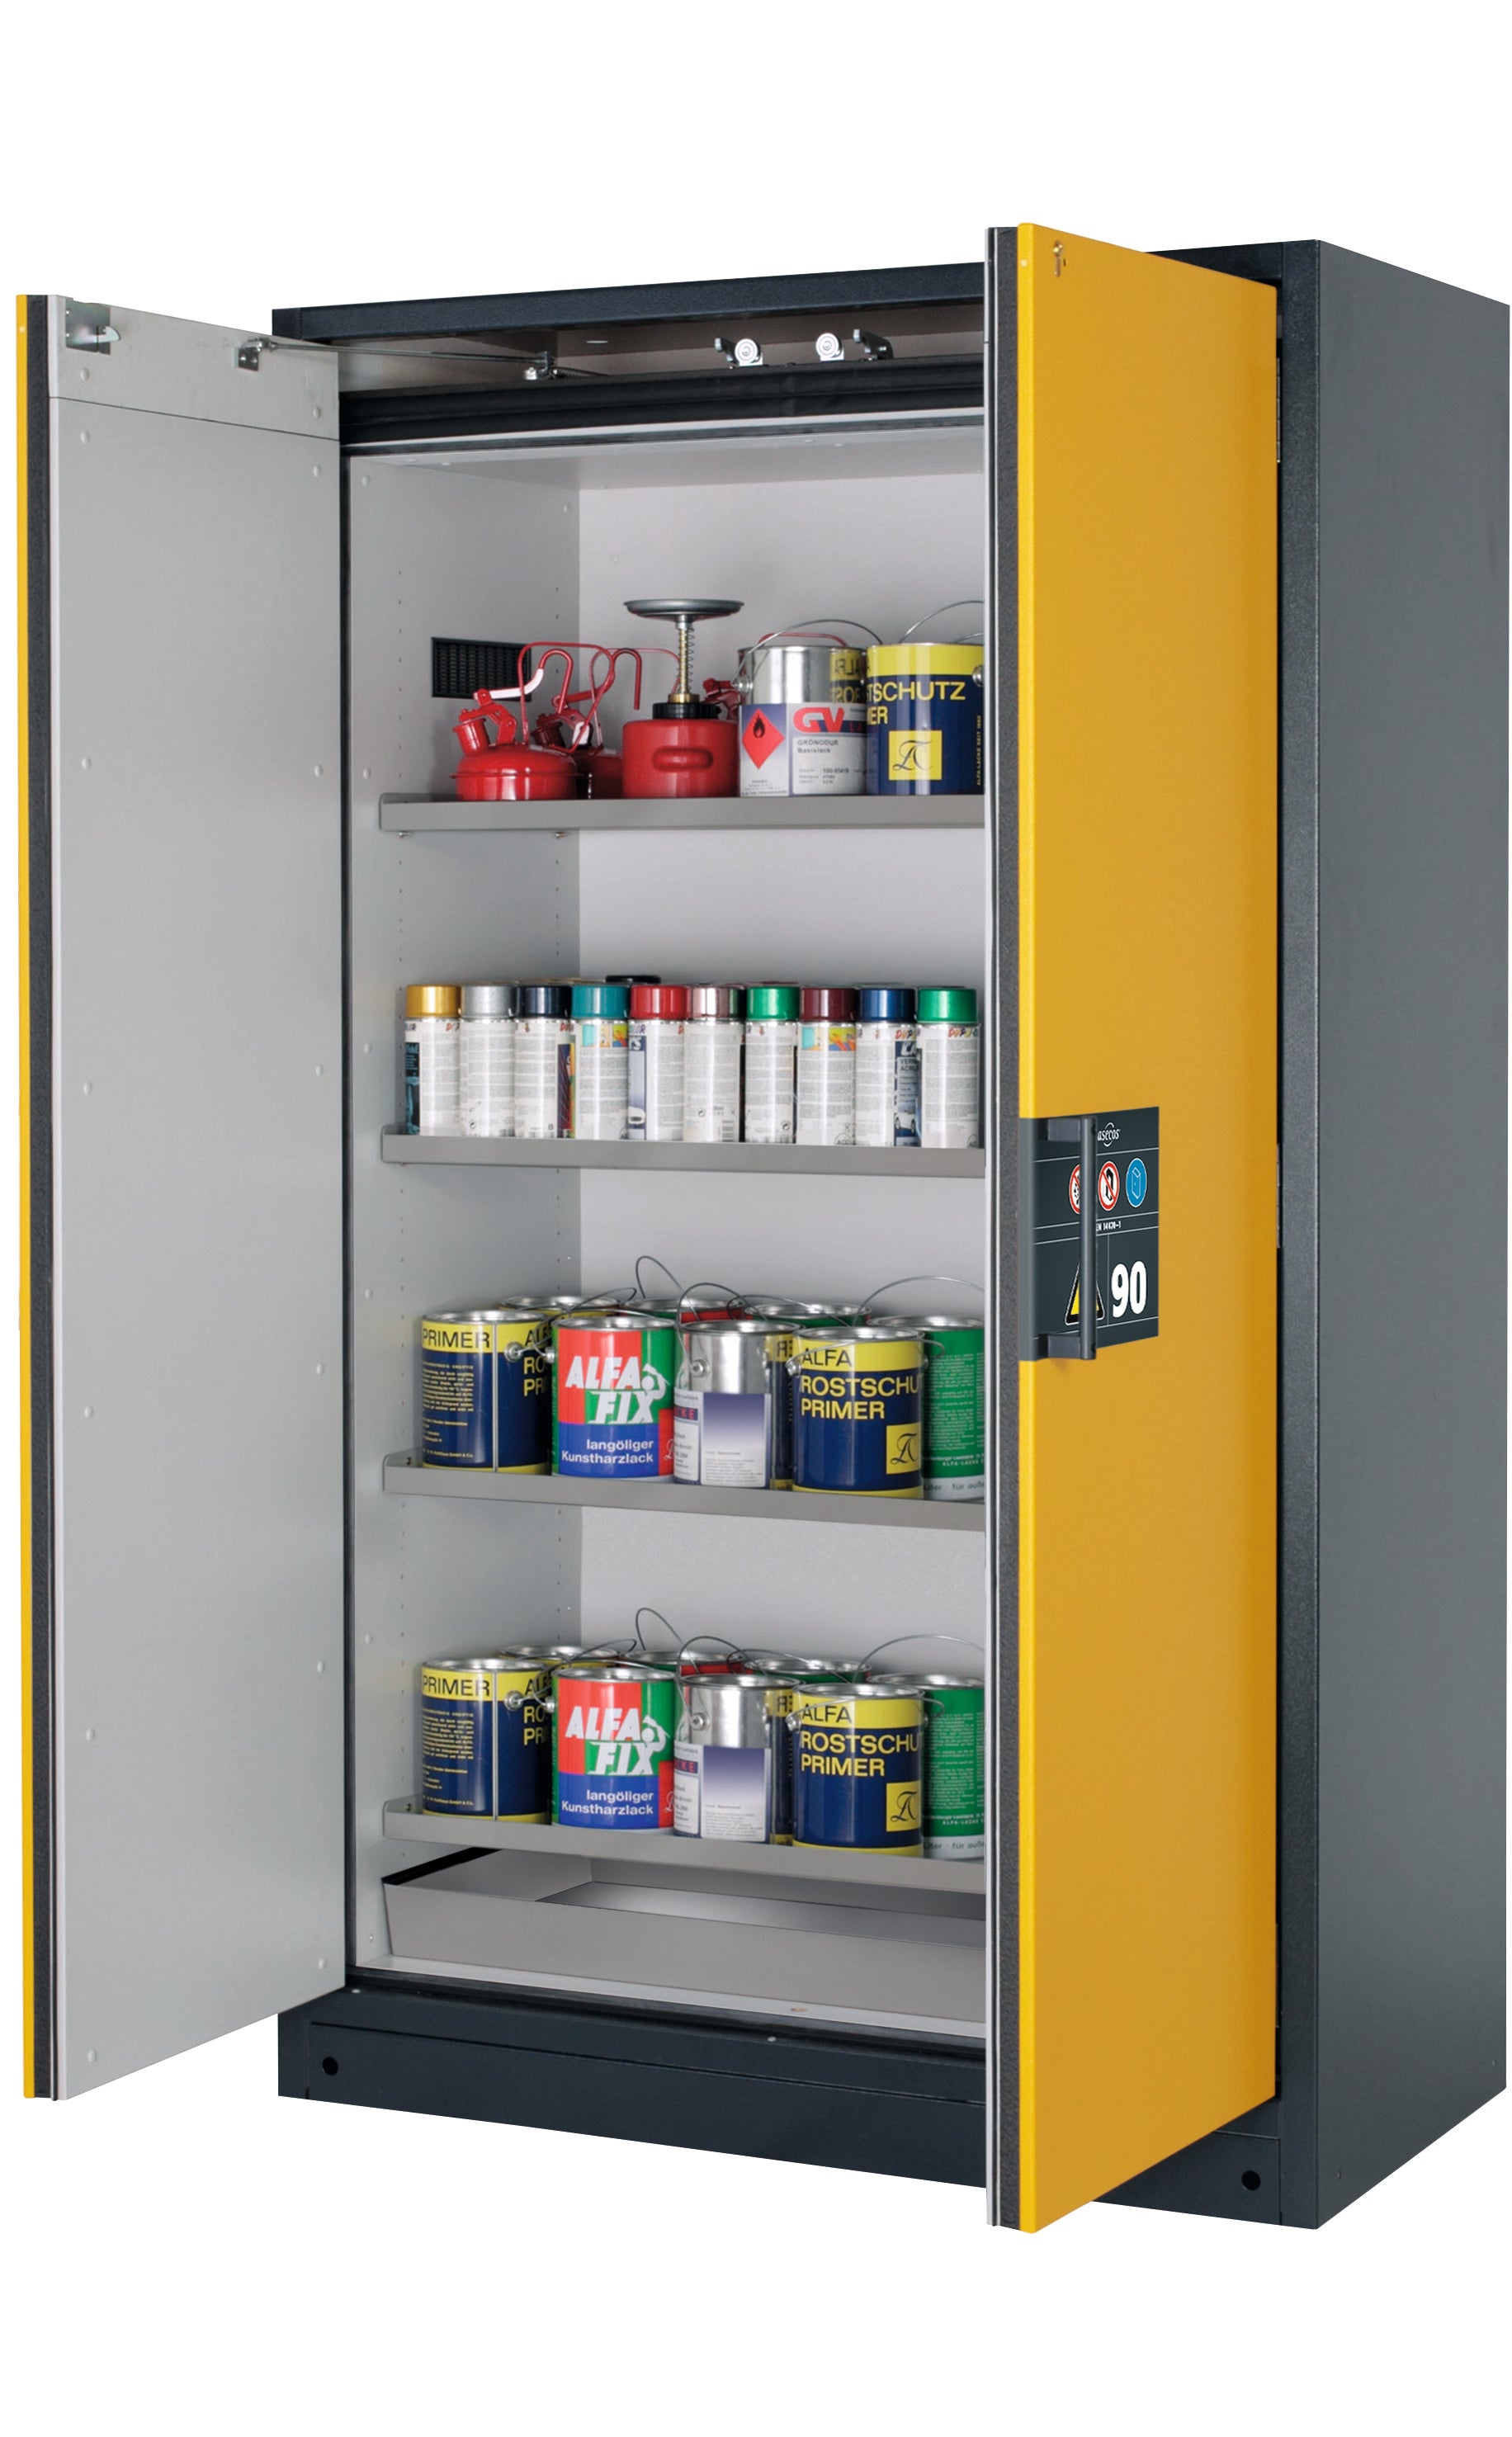 Type 90 safety storage cabinet Q-CLASSIC-90 model Q90.195.120 in warning yellow RAL 1004 with 4x shelf standard (stainless steel 1.4301),